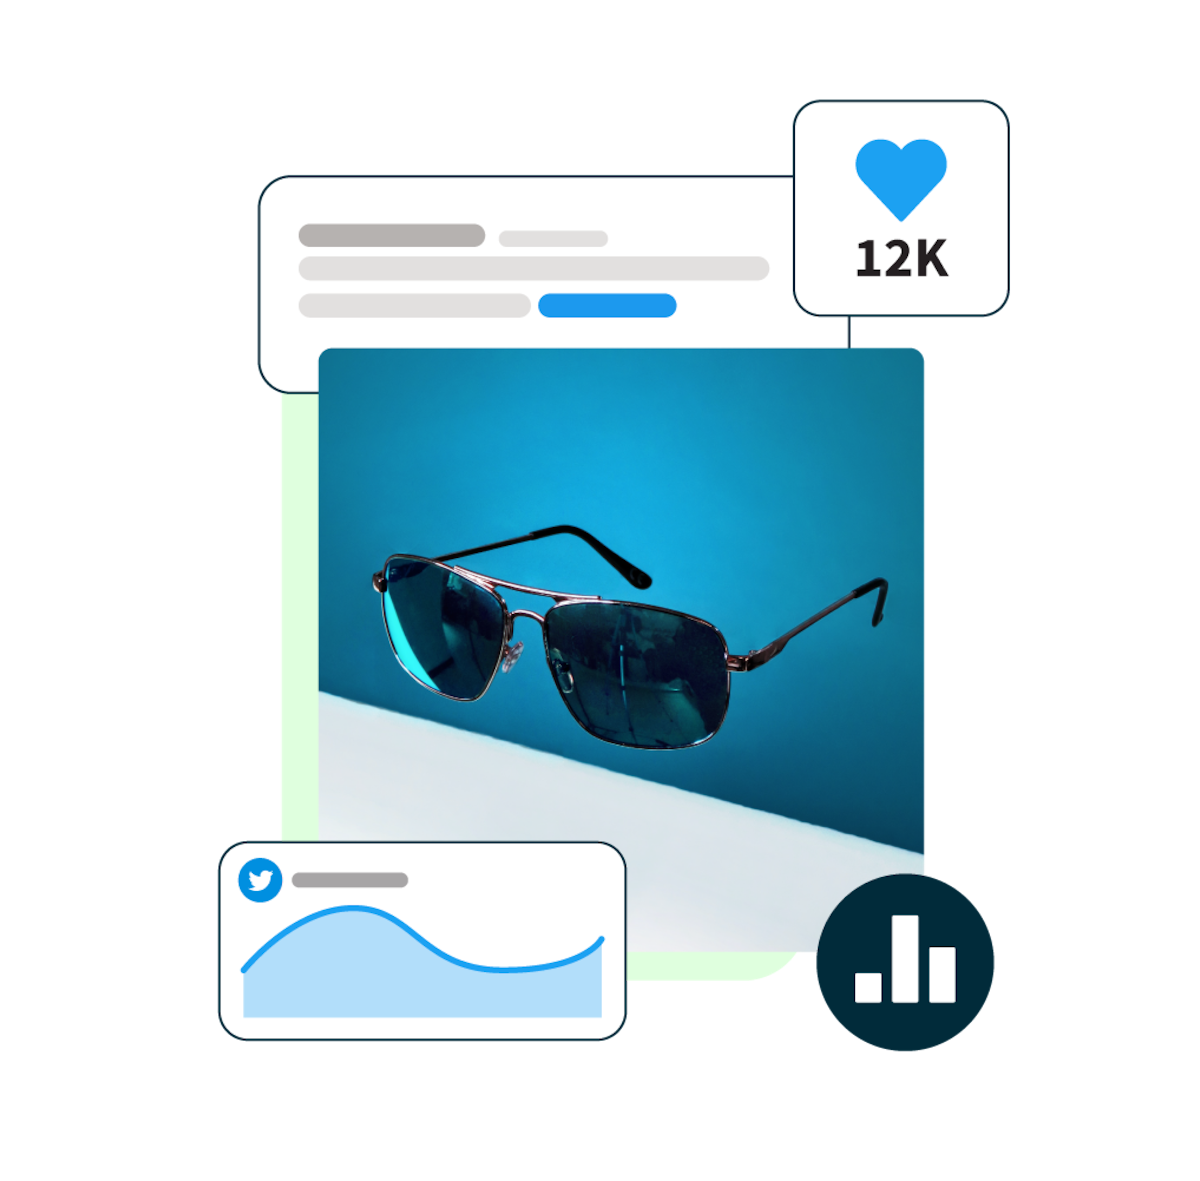 picture of sunglasses floating with a blue background, and social media statistic pop-ups surrounding it